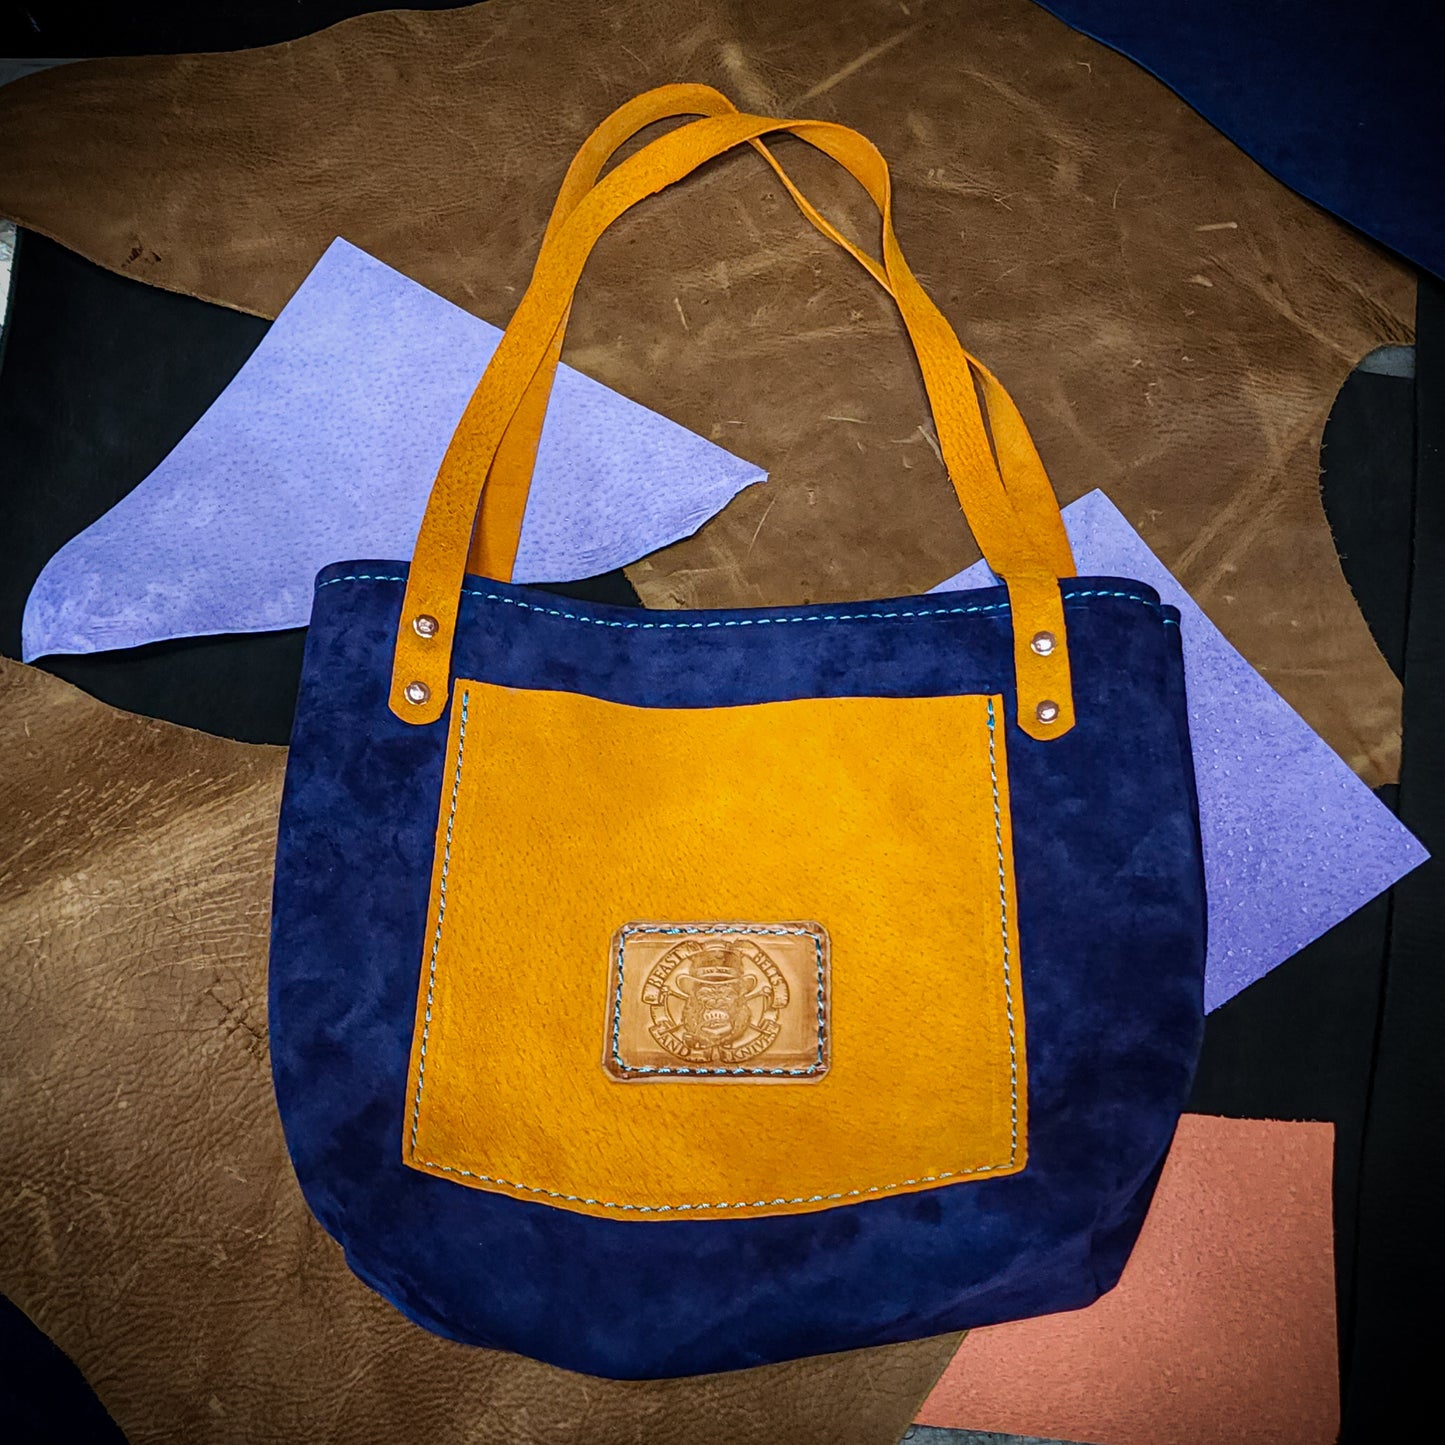 Blue and brown leather tote bag